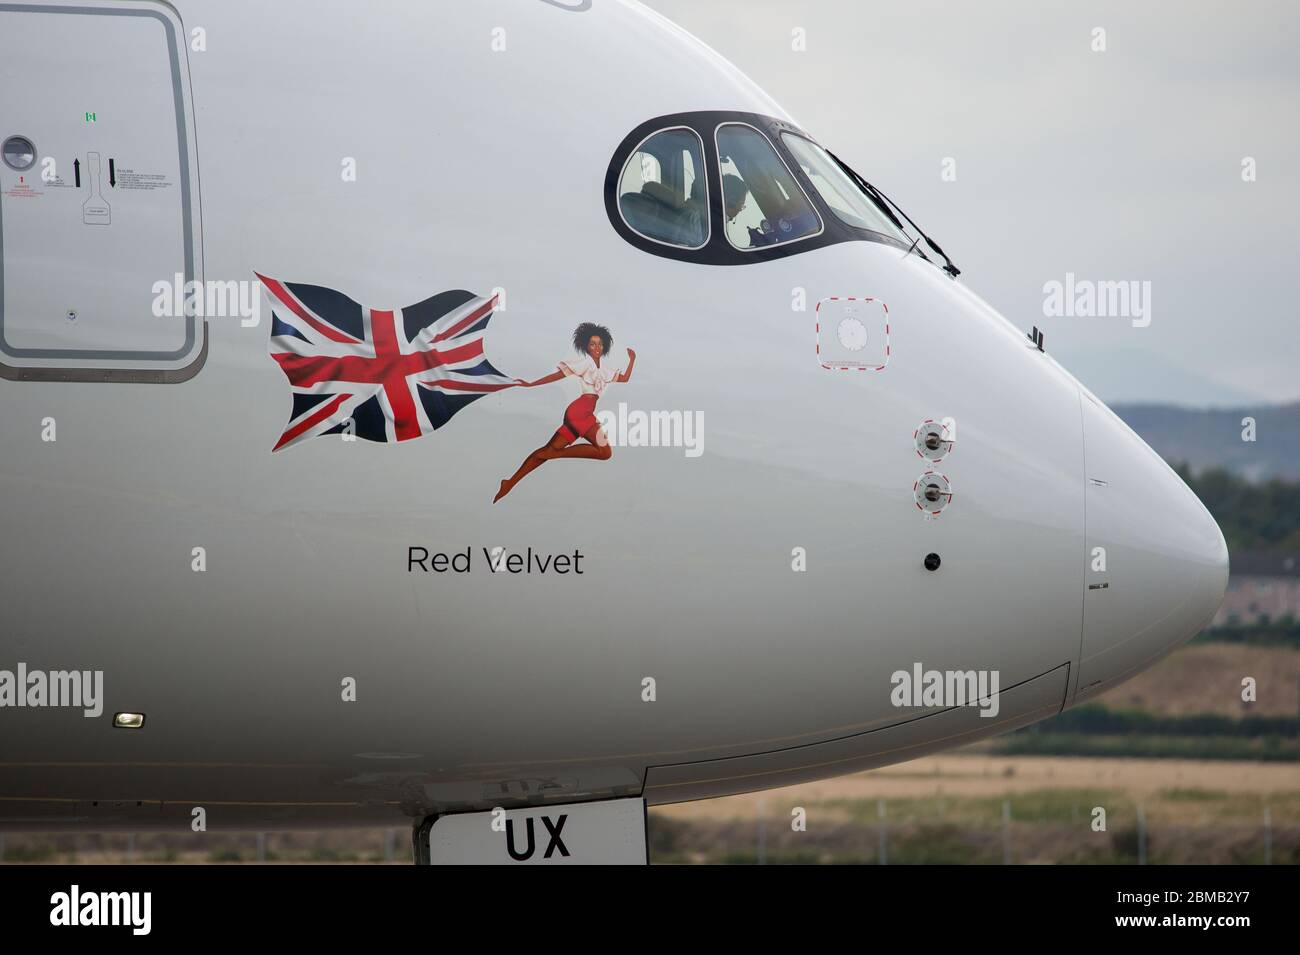 Glasgow, UK. 25 August 2019.  Pictured: Virgin Atlantic Airbus A350-1000 aircraft seen at Glasgow International Airport for pilot training. Virgin's brand new jumbo jet boasts an amazing new 'loft' social space with sofas in business class, and aptly adorned by the registration G-VLUX. The entire aircraft will also have access to high-speed Wi-Fi. Virgin Atlantic has ordered a total of 12 Airbus A350-1000s. They are all scheduled to join the fleet by 2021 in an order worth an estimated $4.4 billion (£3.36 billion). Credit: Colin Fisher/Alamy Live News. Stock Photo